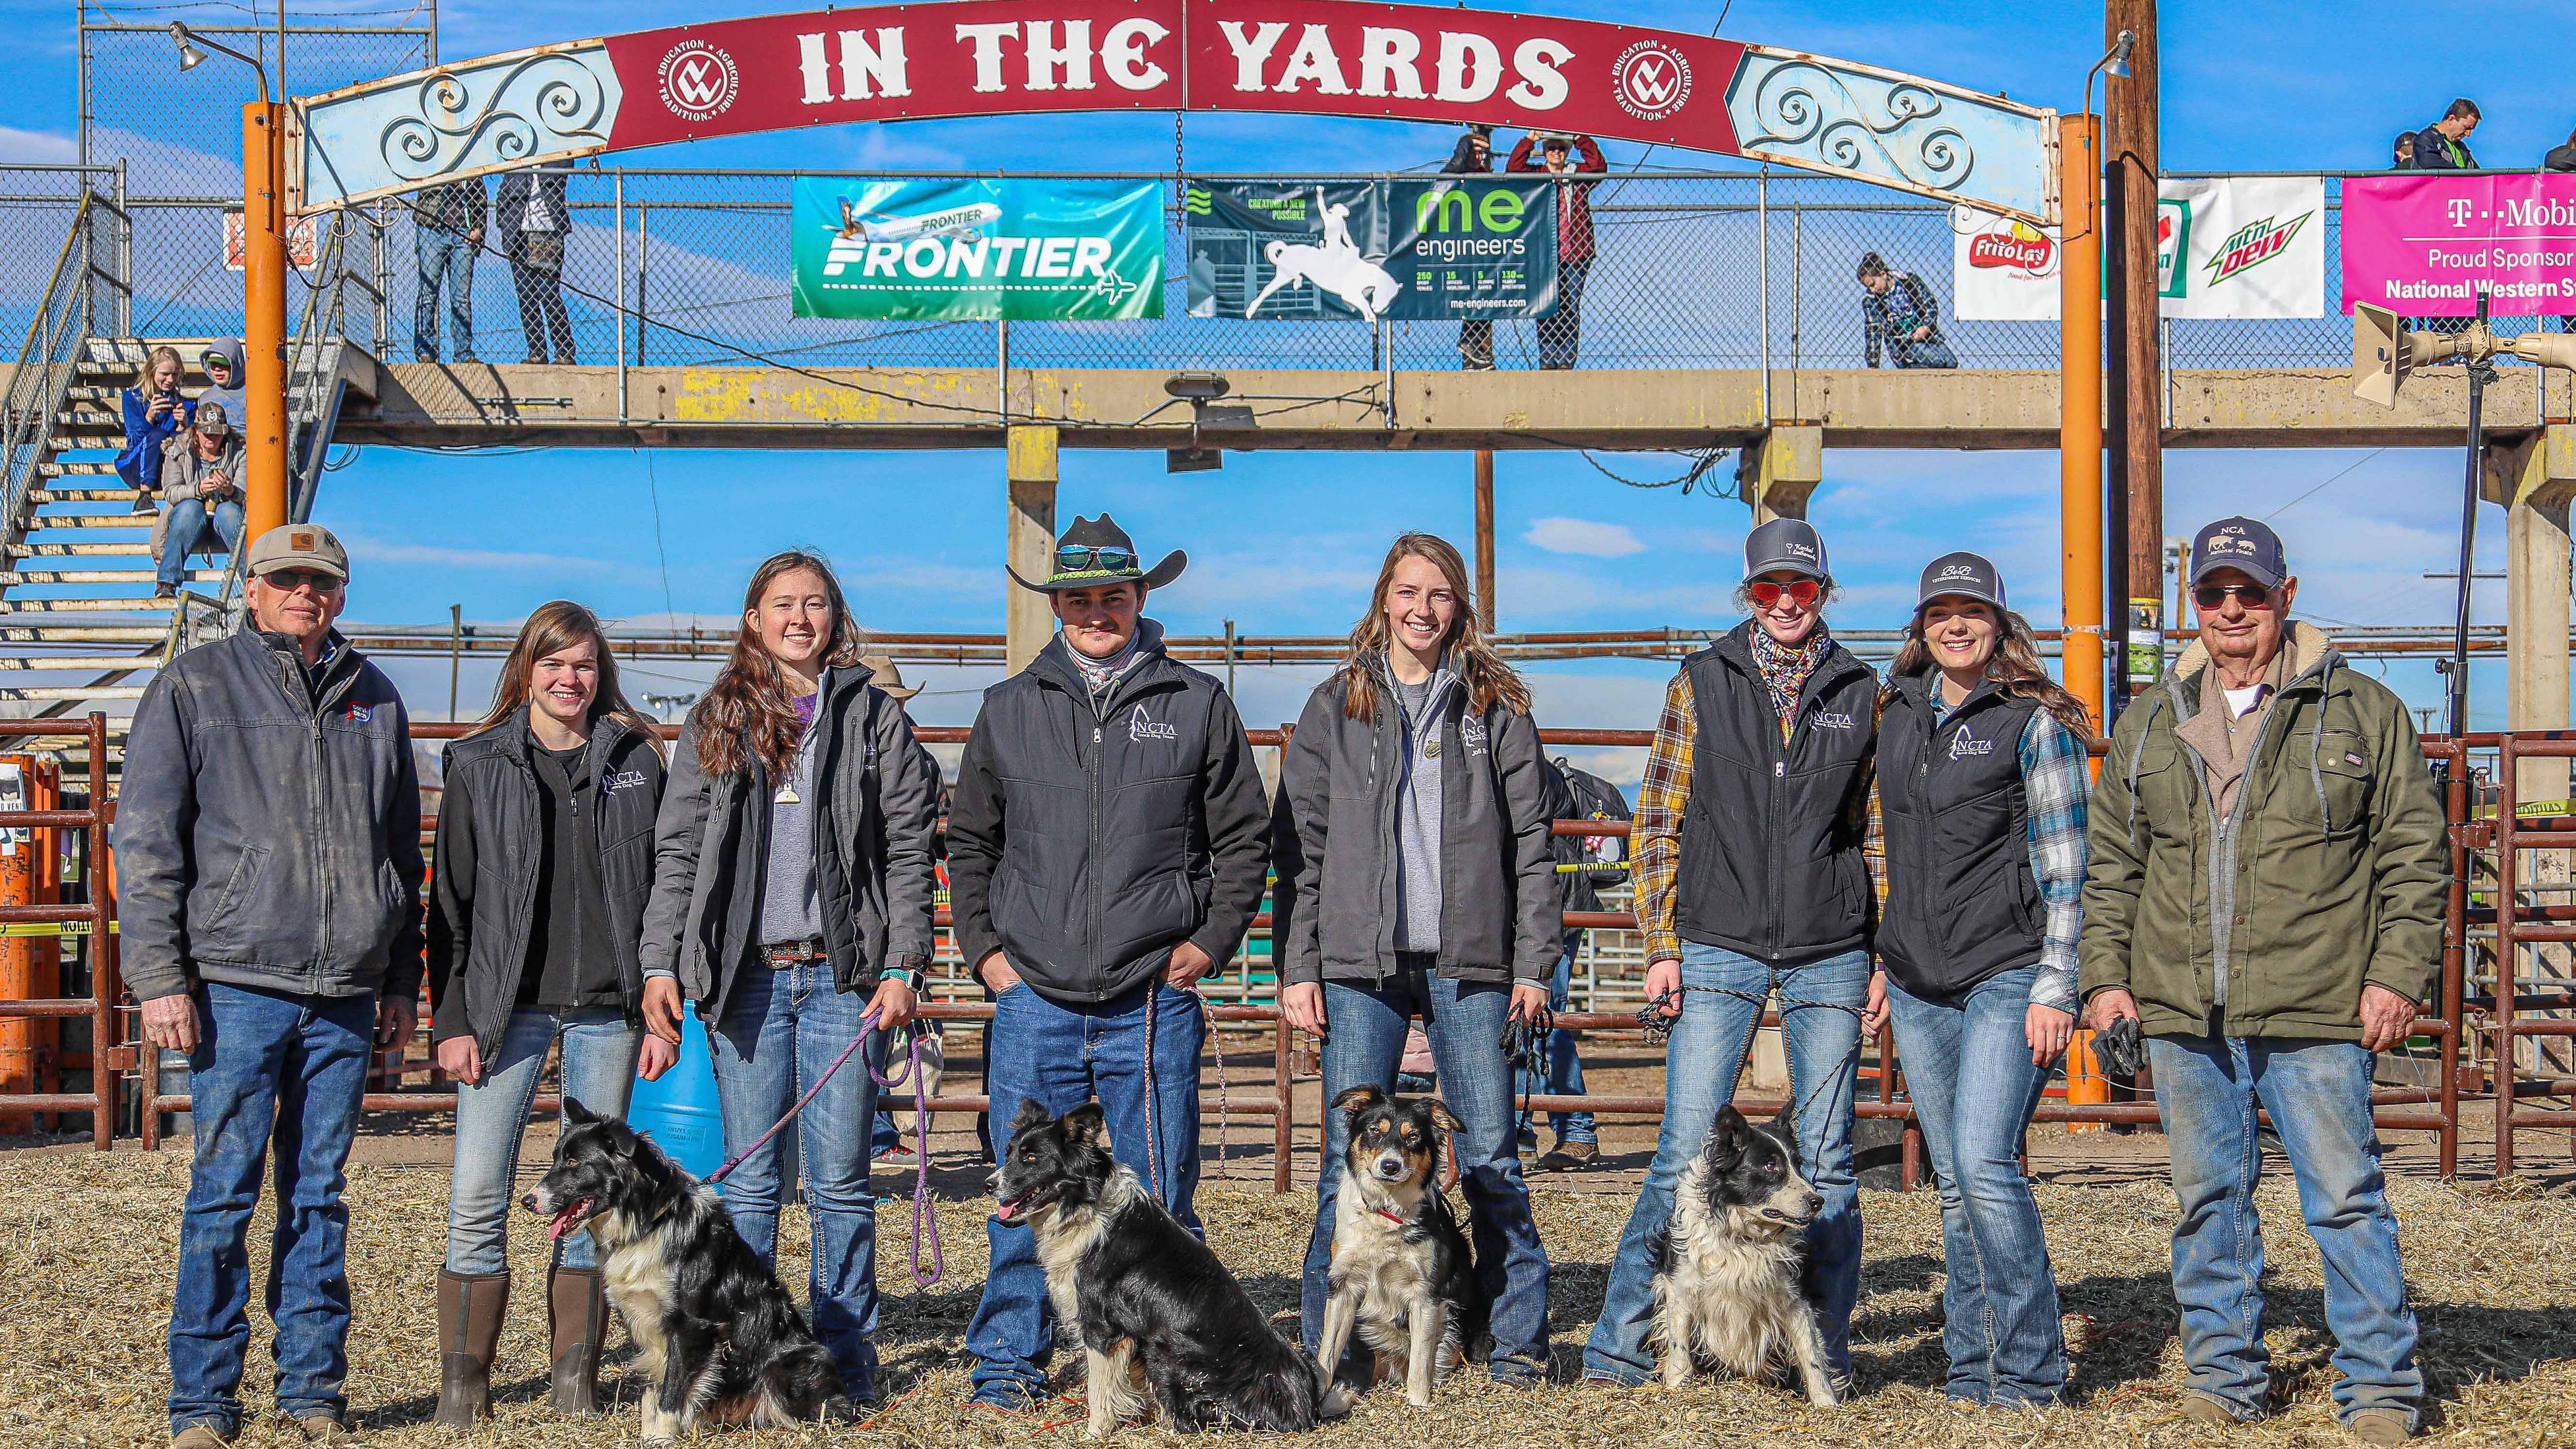 The NCTA Stock Dog Team will pay tribute to two of their mentors. Kelly Popp, left, and Eddie Merritt, right, recently passed away. The coaches volunteered for more than 10 years to mentor NCTA dog handlers, as shown at the 2020 National Western Stock Show in Denver.  (Photo by XP Photography for NCTA)